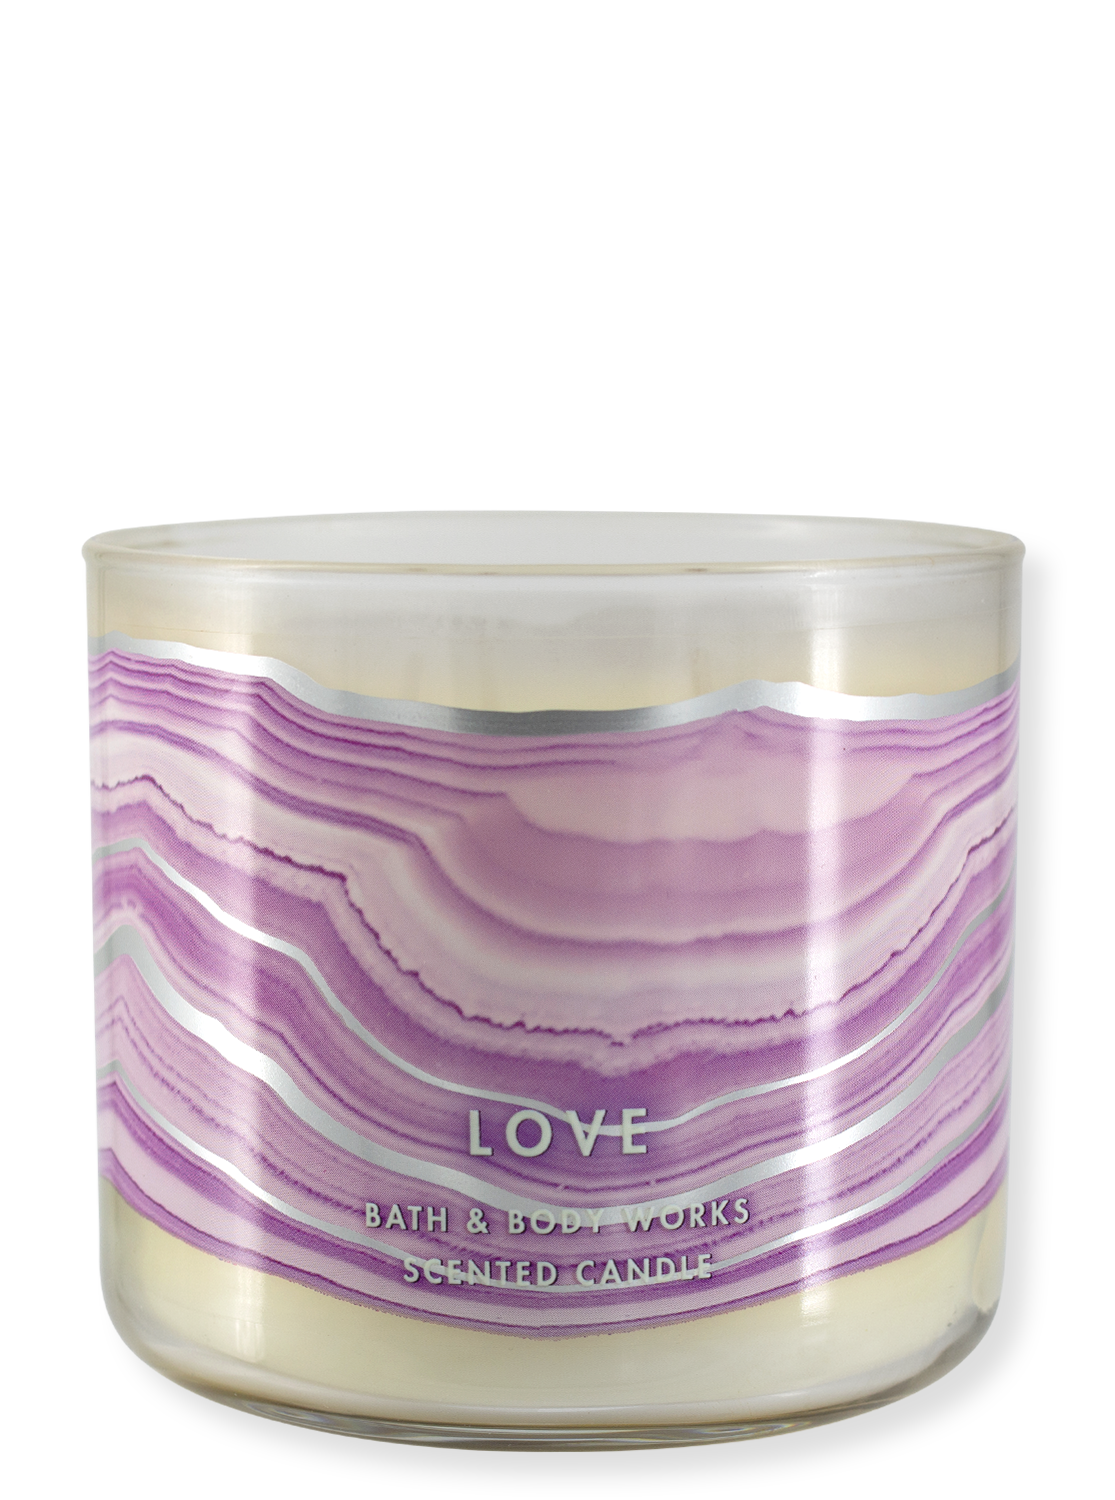 Rarity - 3 -Doct Candle - Love - 411g